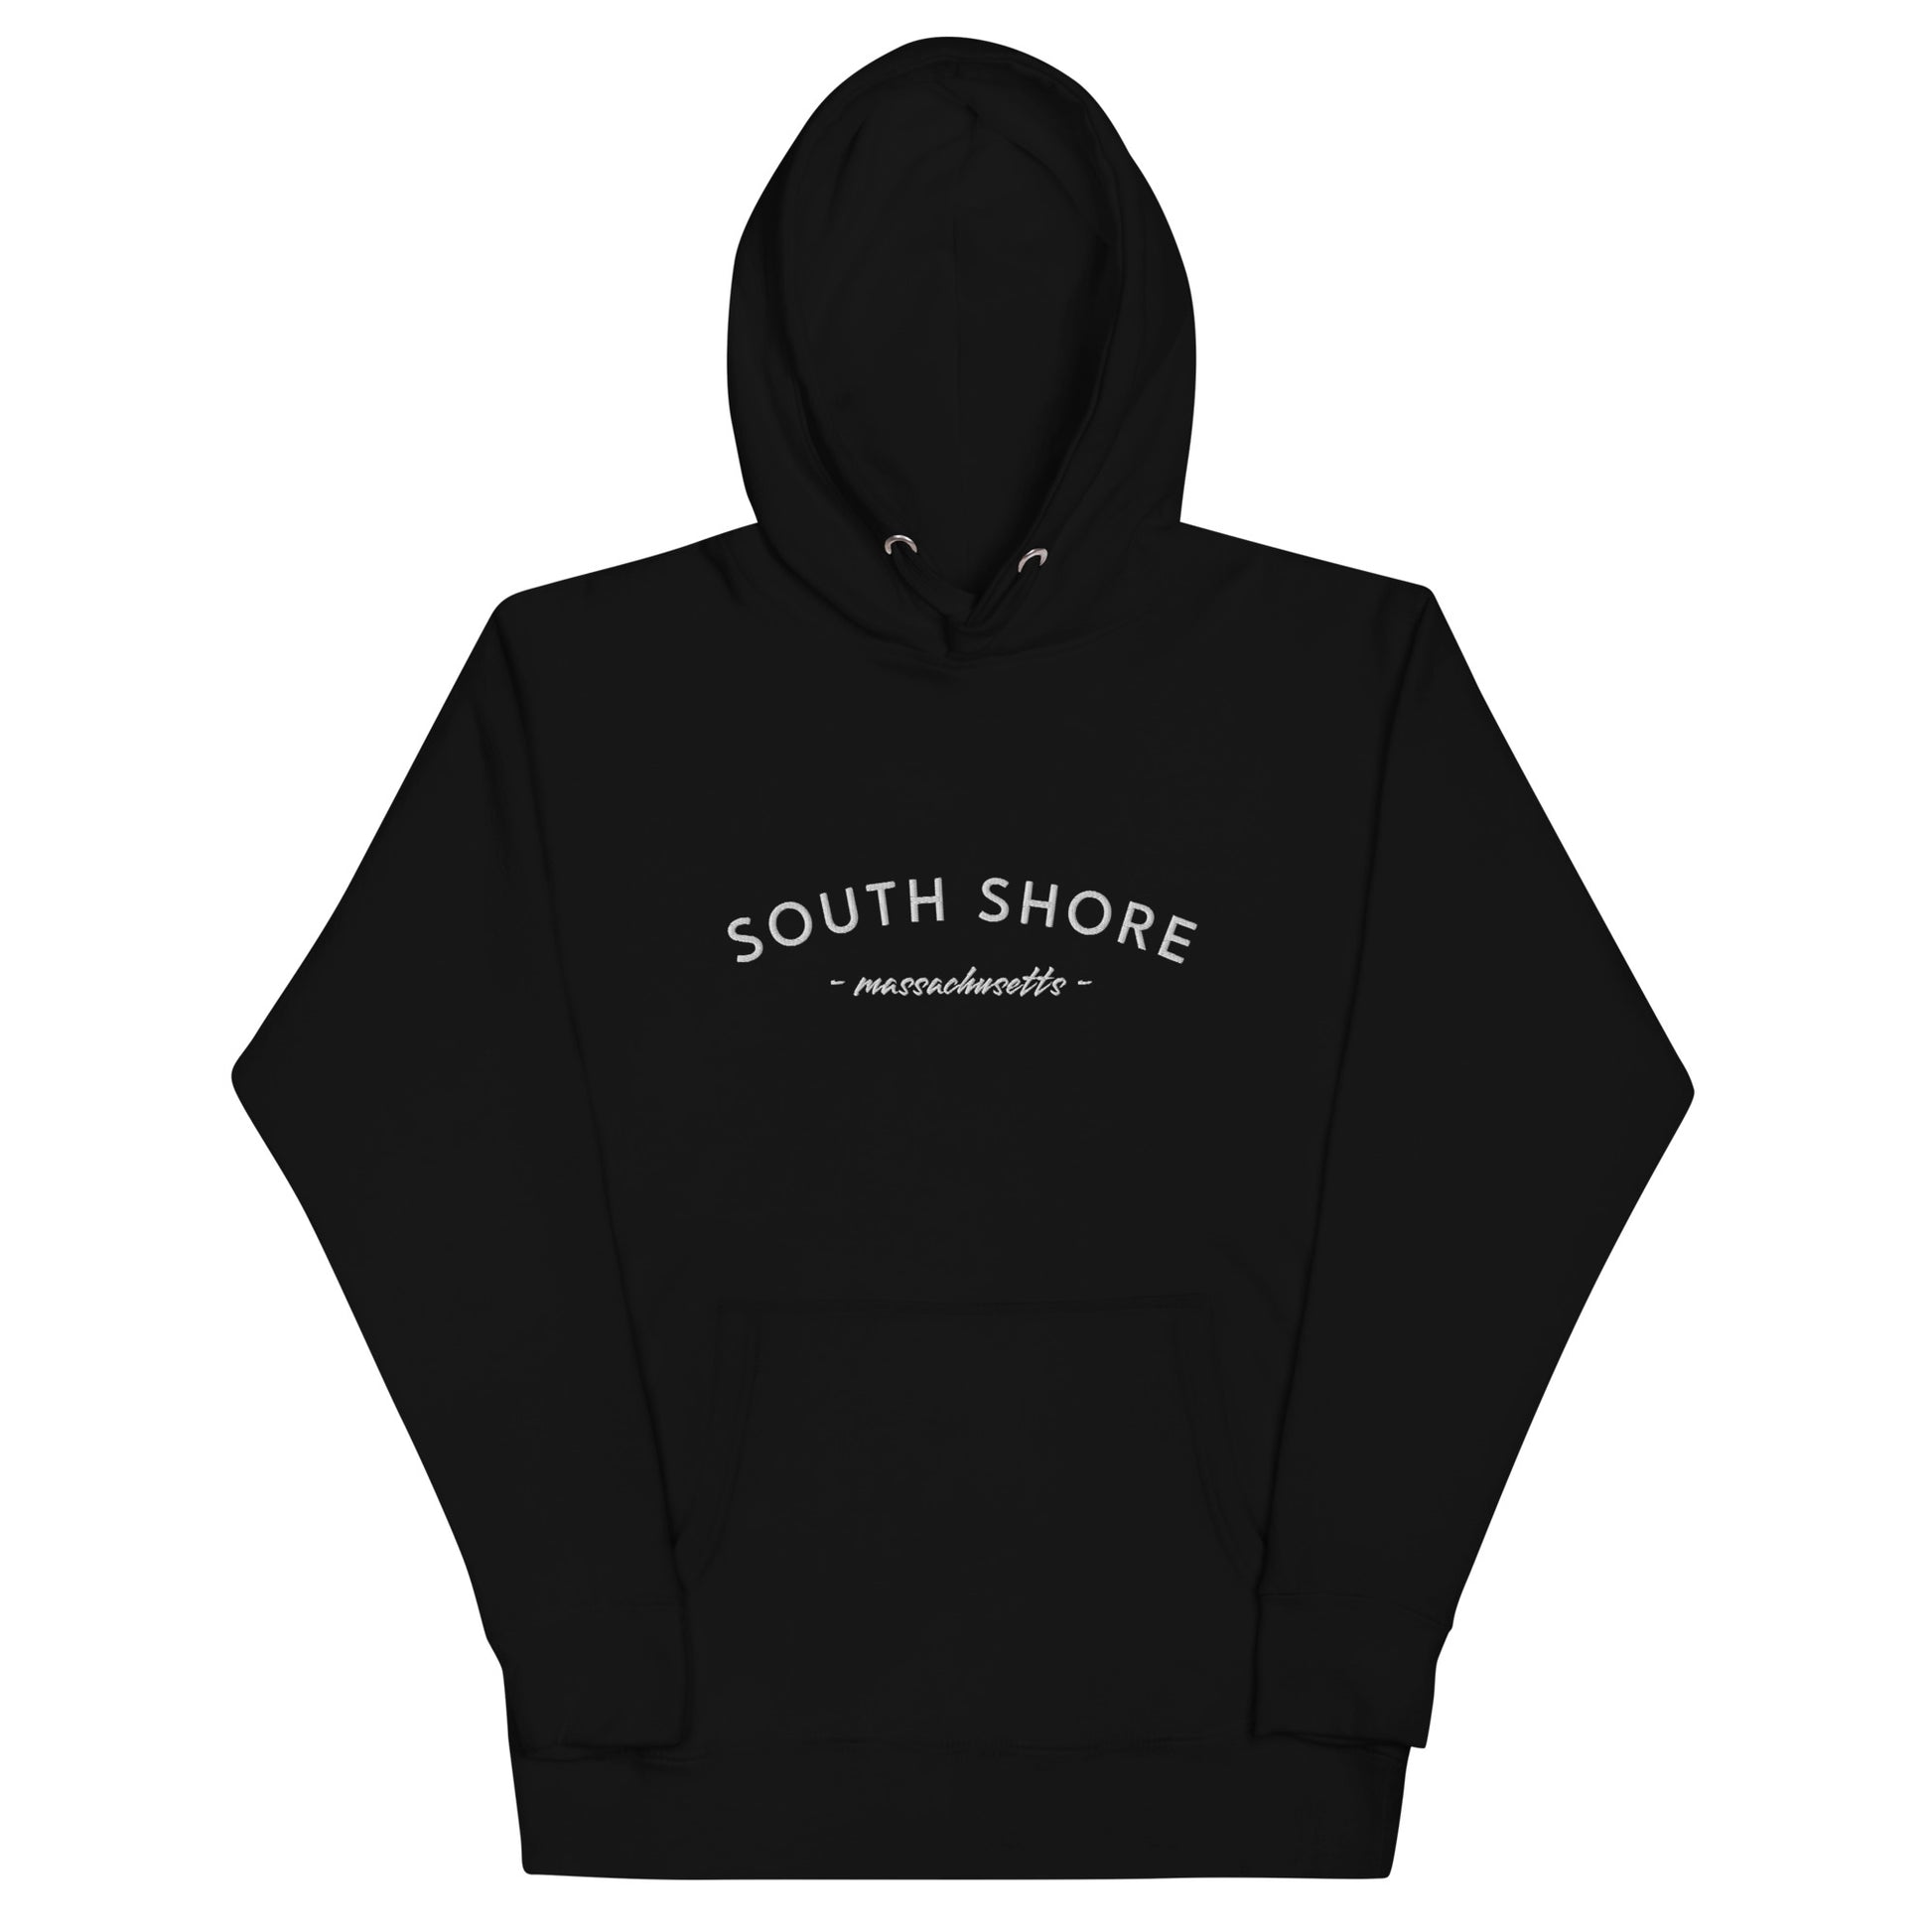 black hoodie that says "south shore massachusetts" with white lettering